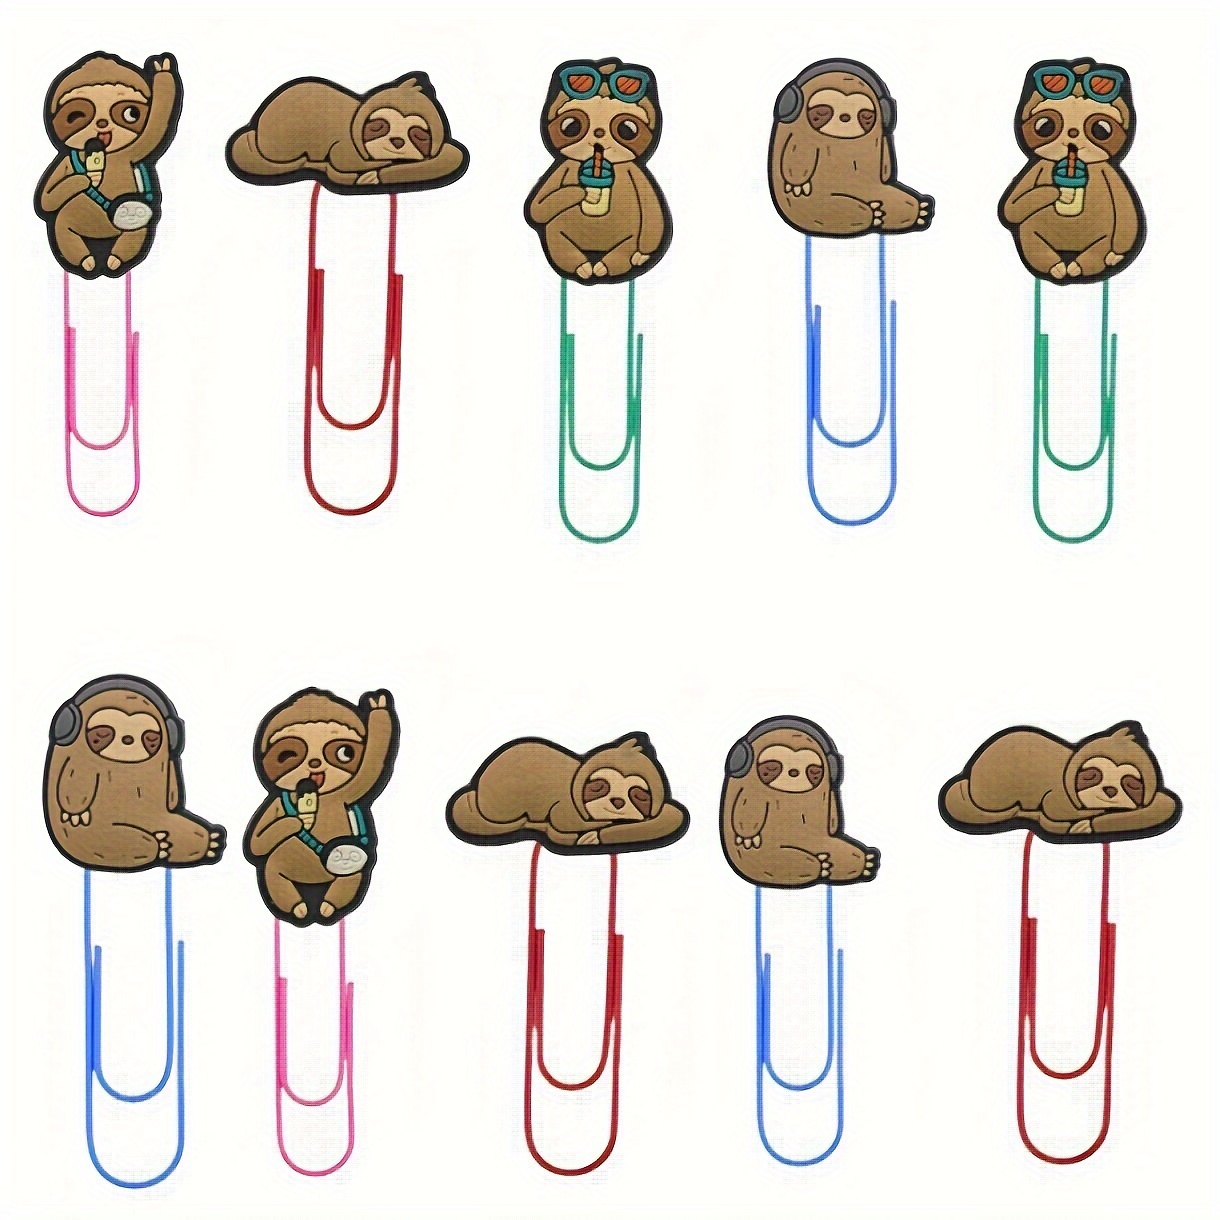 

10 Pcs Cute Cartoon Sloth Paper Clips - Colorful Bookmark Clips For Office, School, And Home - Non-rechargeable, No Feathers, Electricity-free Desk Accessories For Books And Files